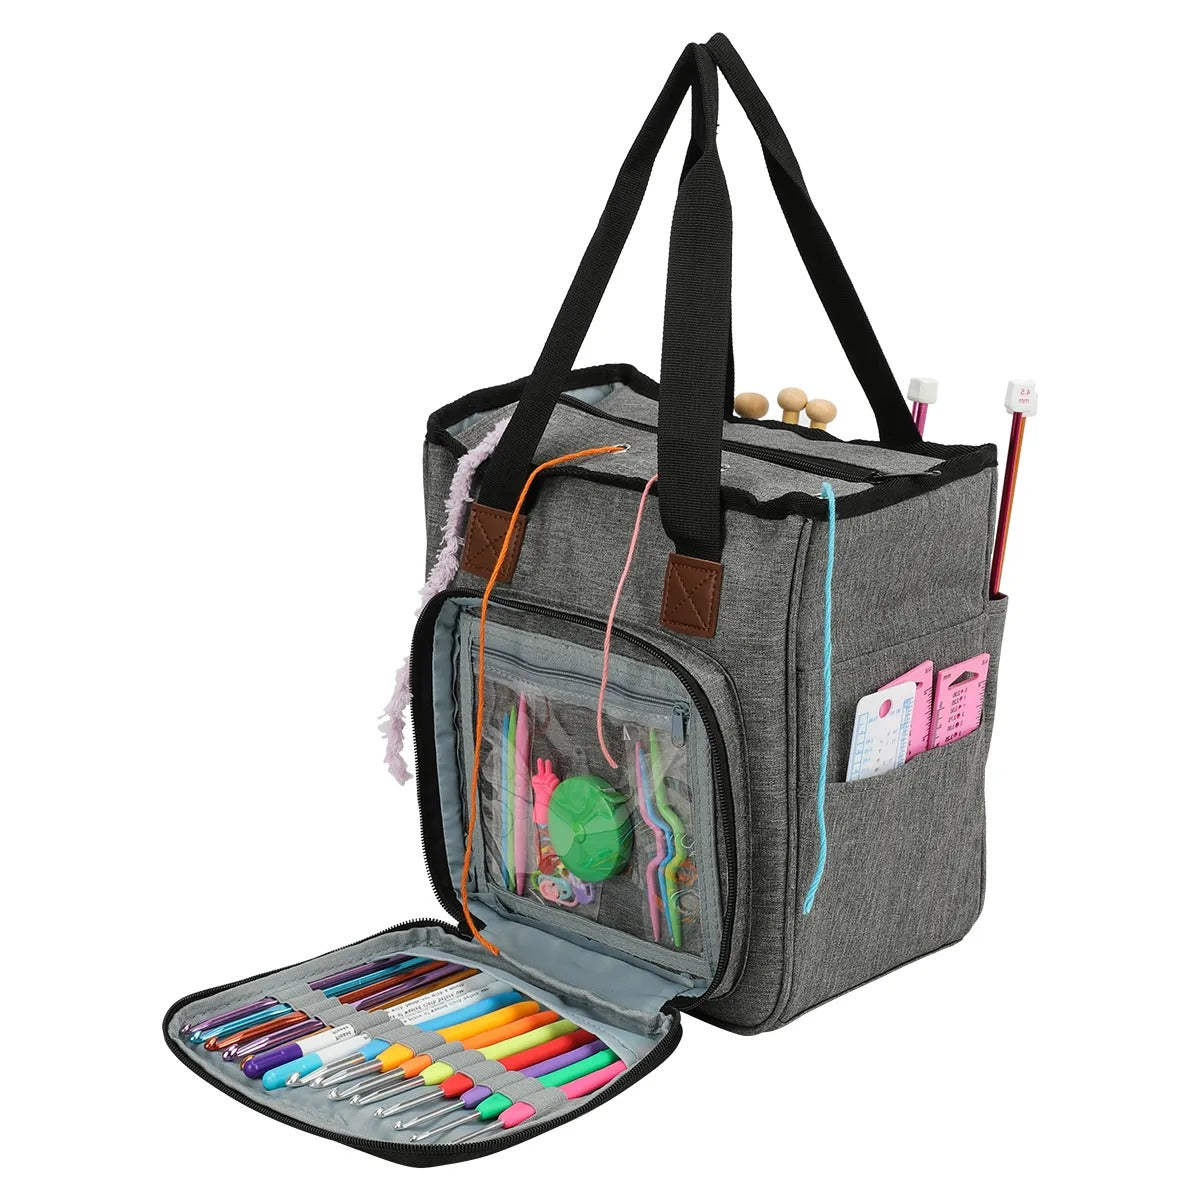 A gray Yarn Organizer Tote bag with pockets containing yarn and knitting essentials, and a front compartment displaying colored markers and pens.